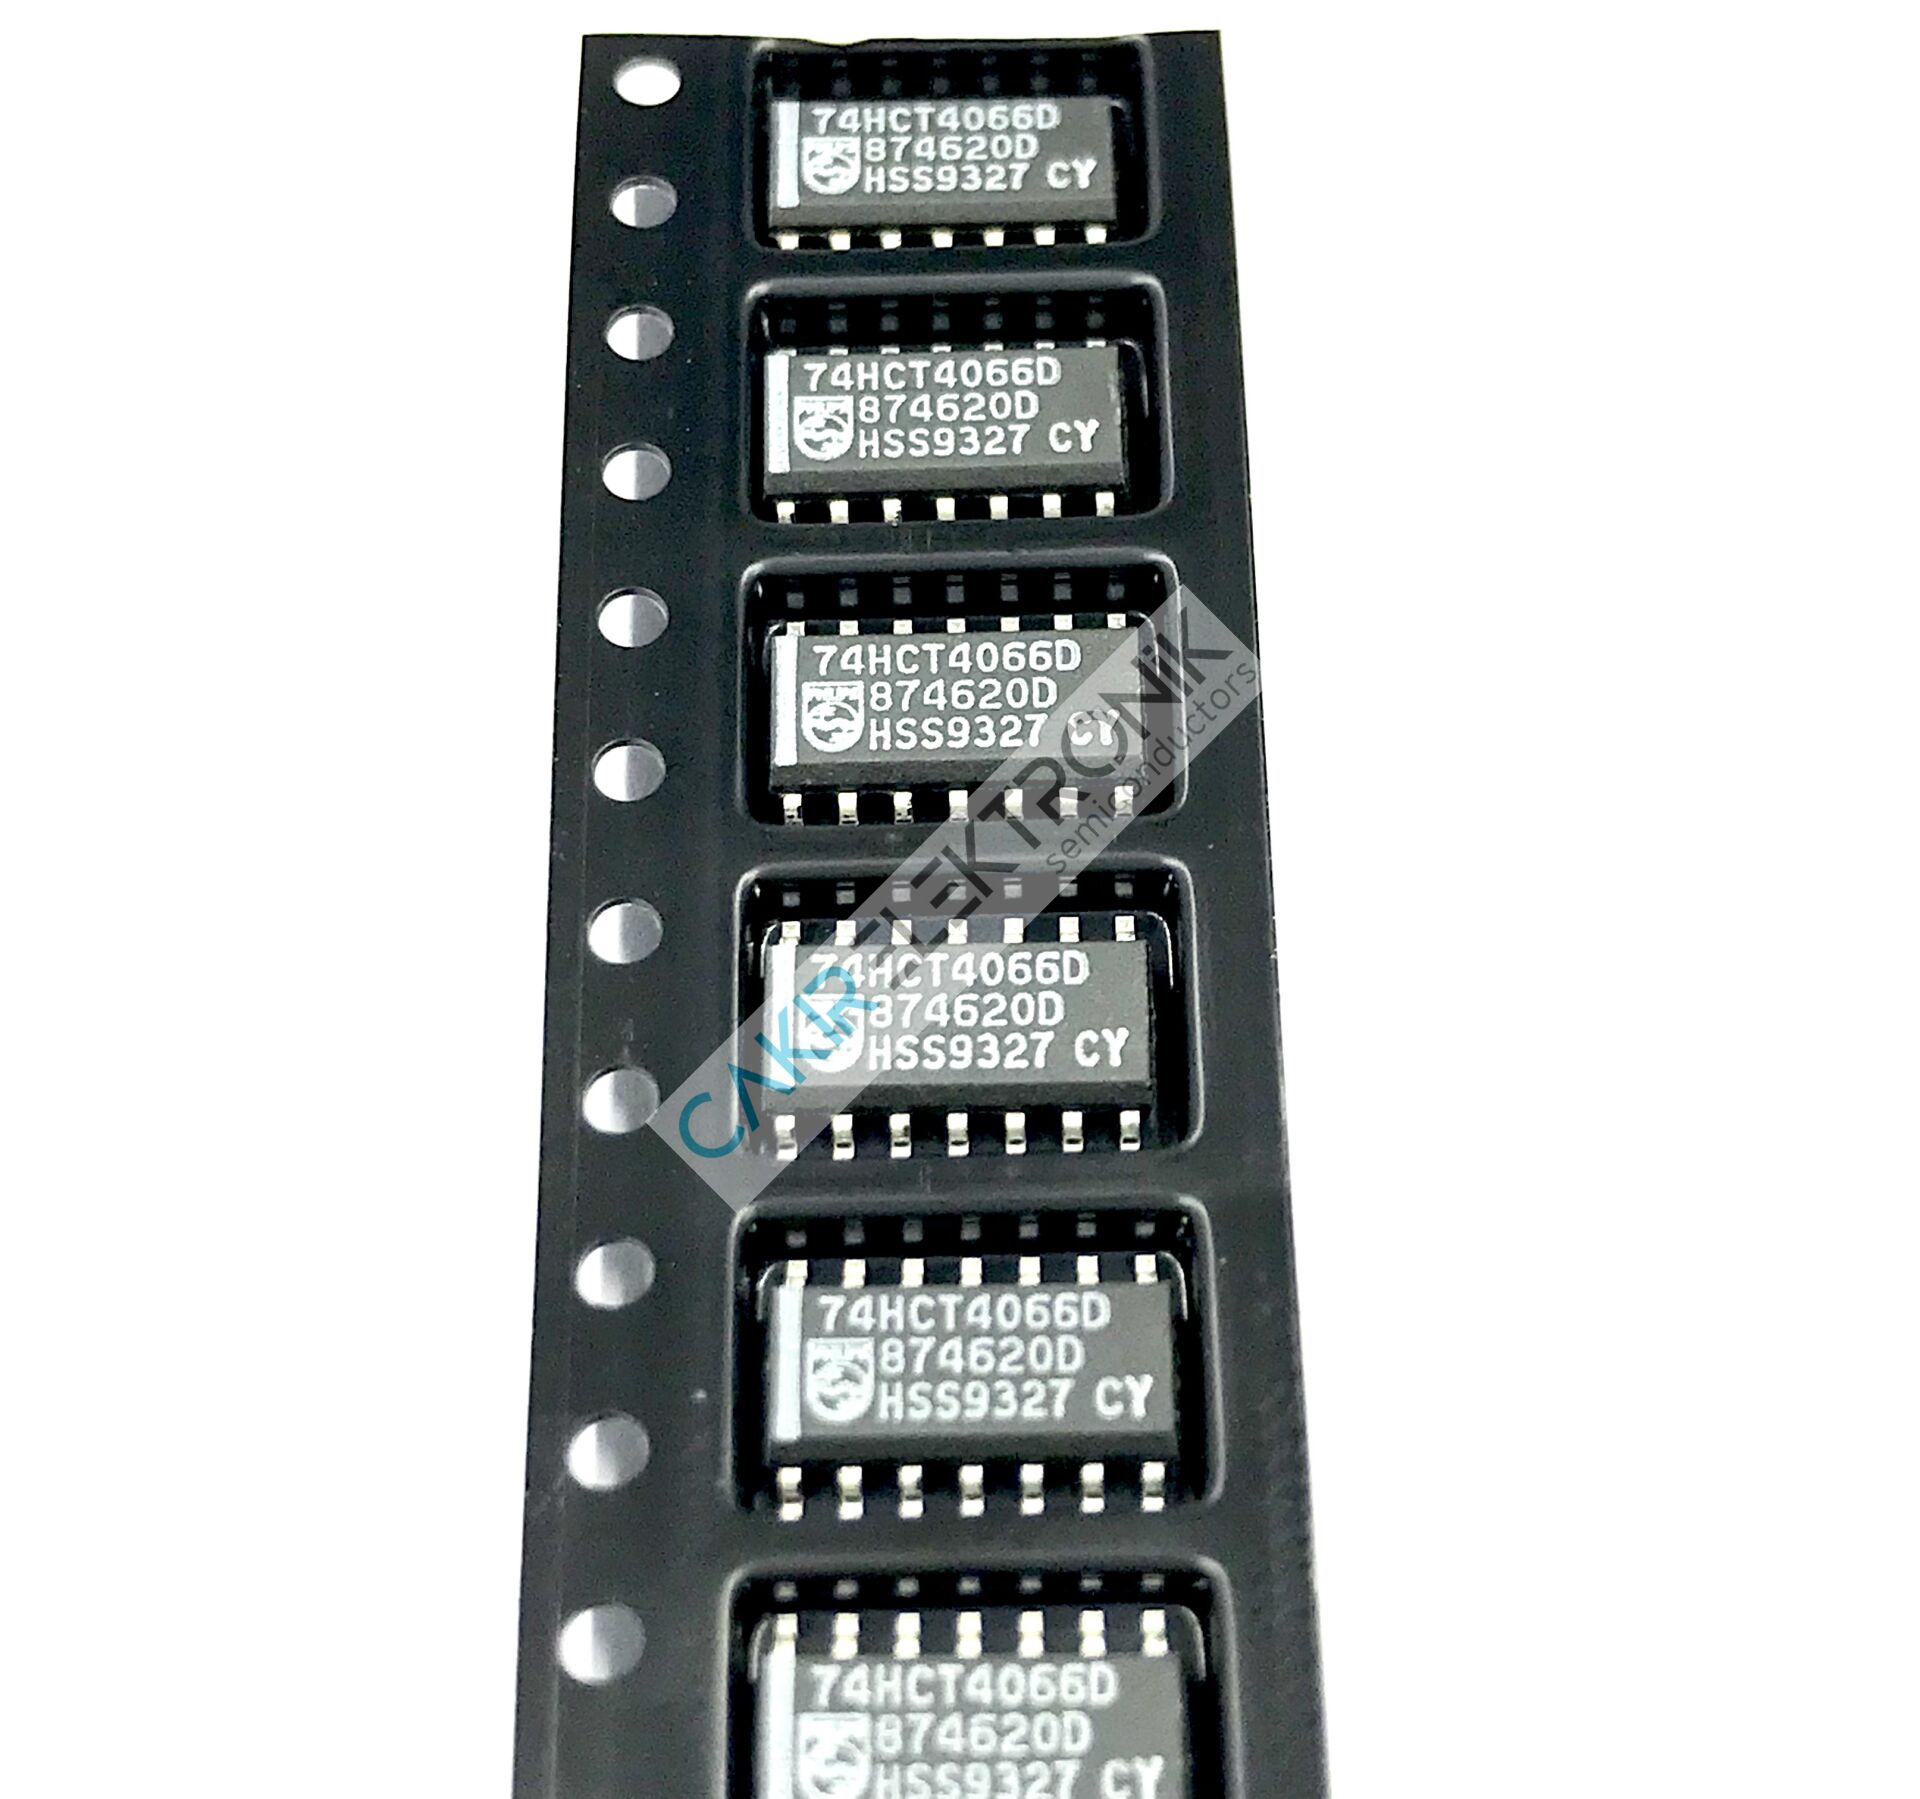 74HCT4066D - HCT4066 - 74HCT4066 - 74HCT4066D  Quad Bilateral Switch IC